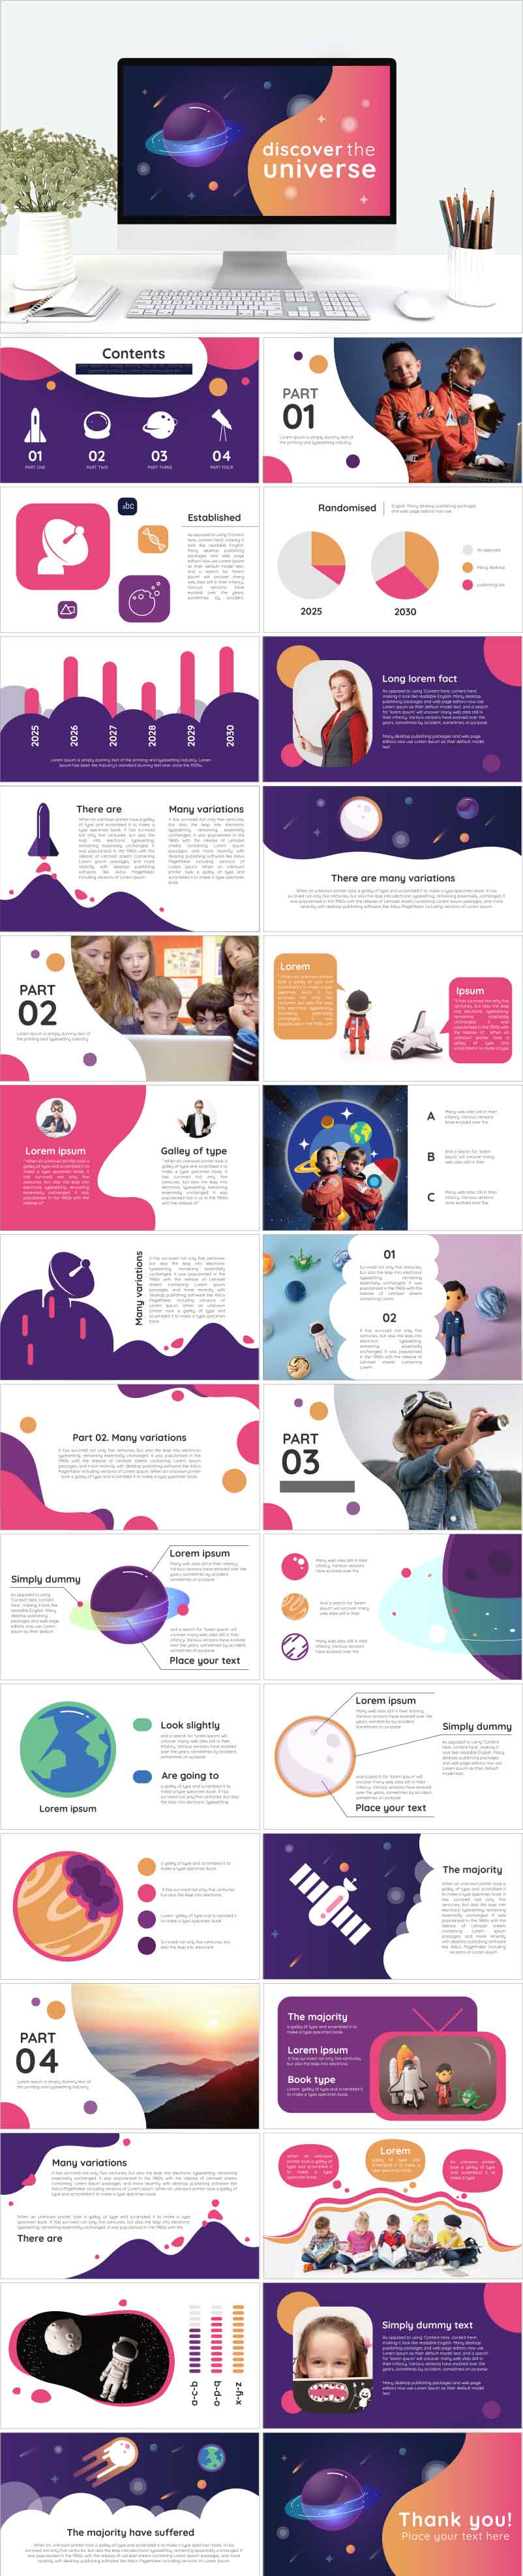 PowerPoint template vol.47